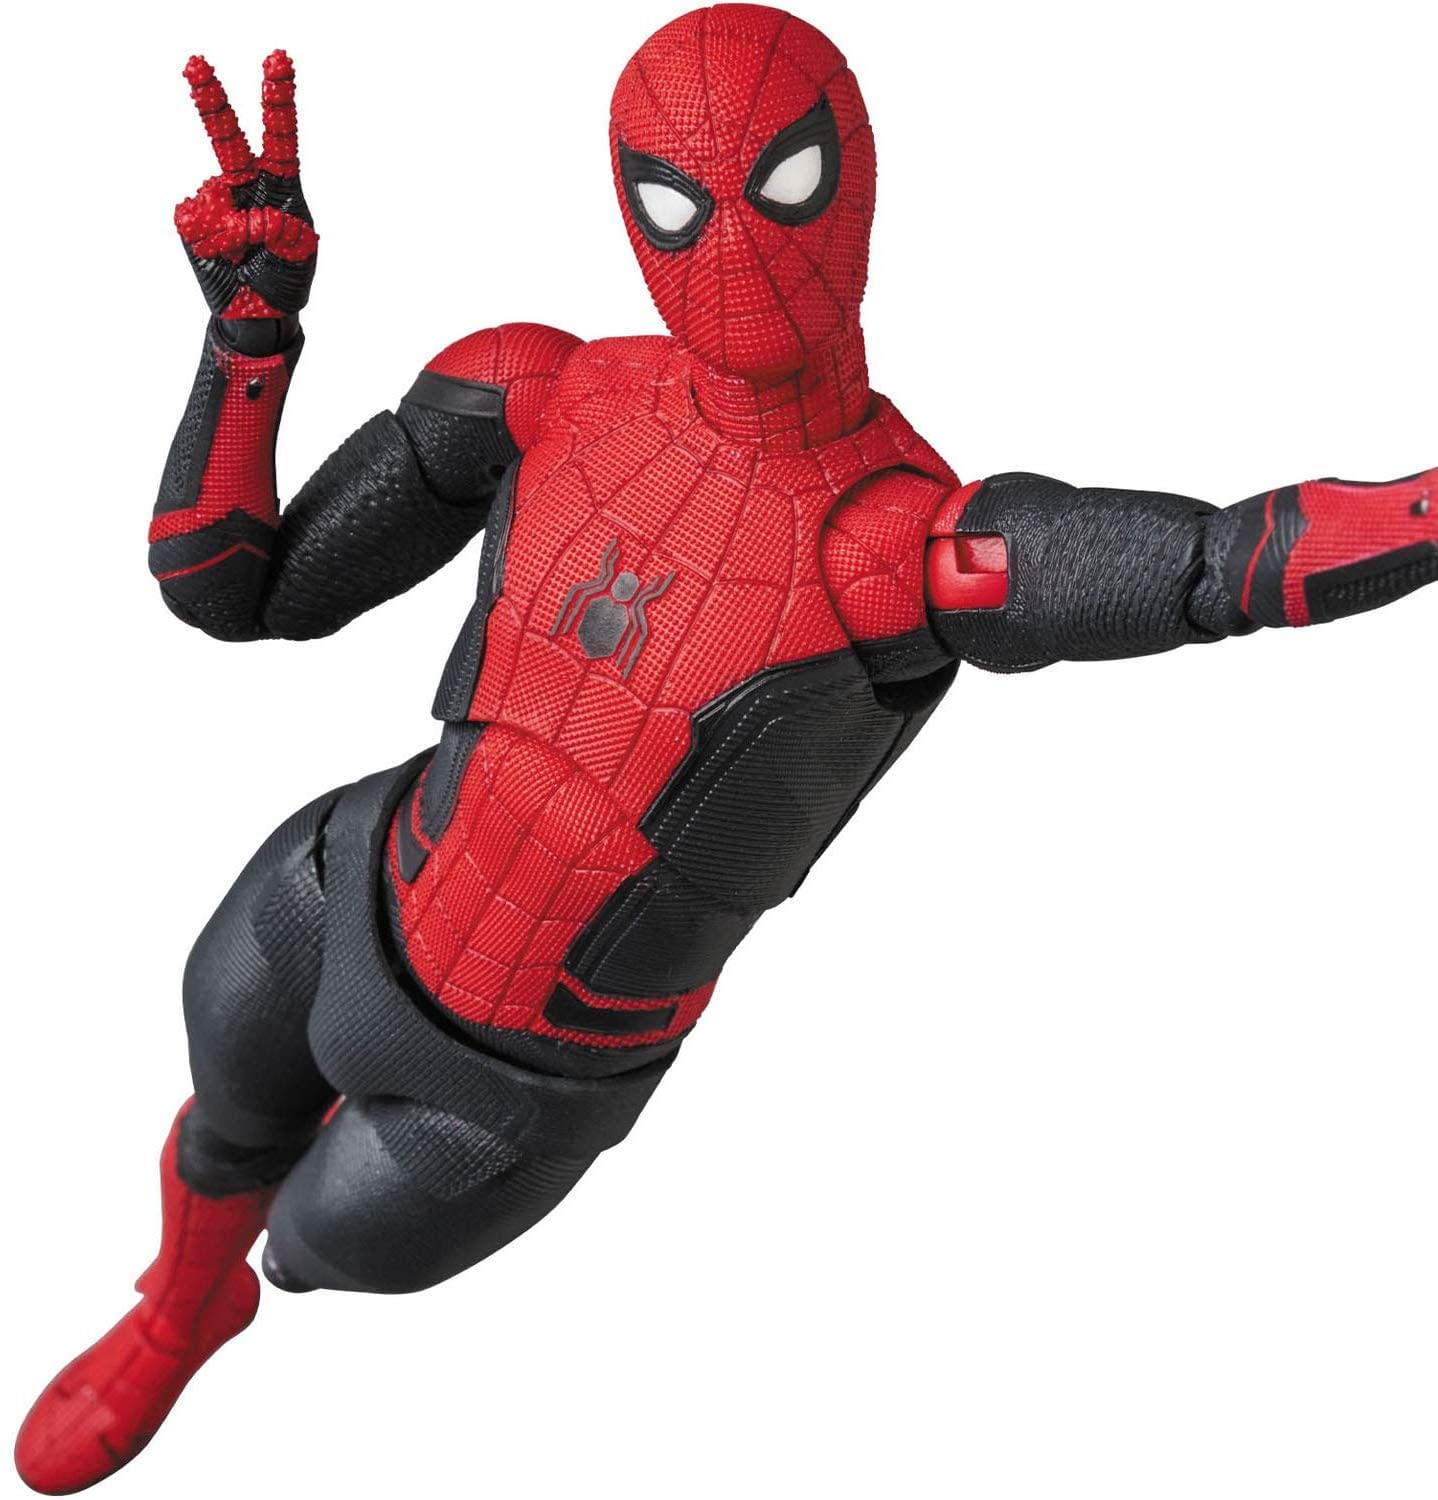 Spider-Man Has his Upgraded Suit Ready for Action with MAFEX